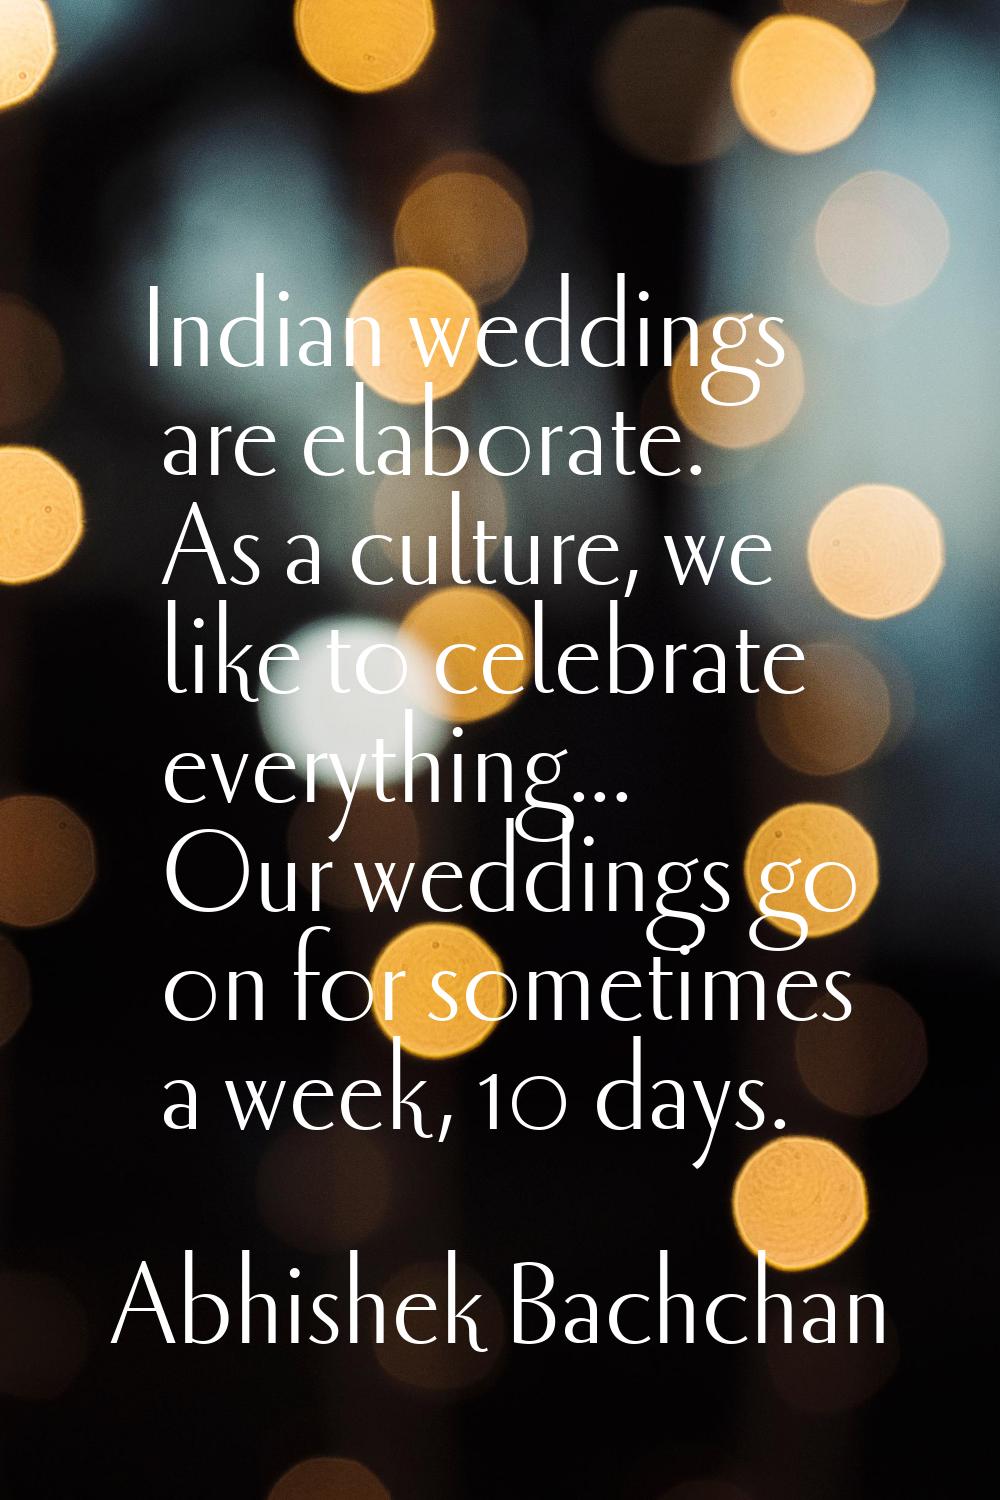 Indian weddings are elaborate. As a culture, we like to celebrate everything... Our weddings go on 